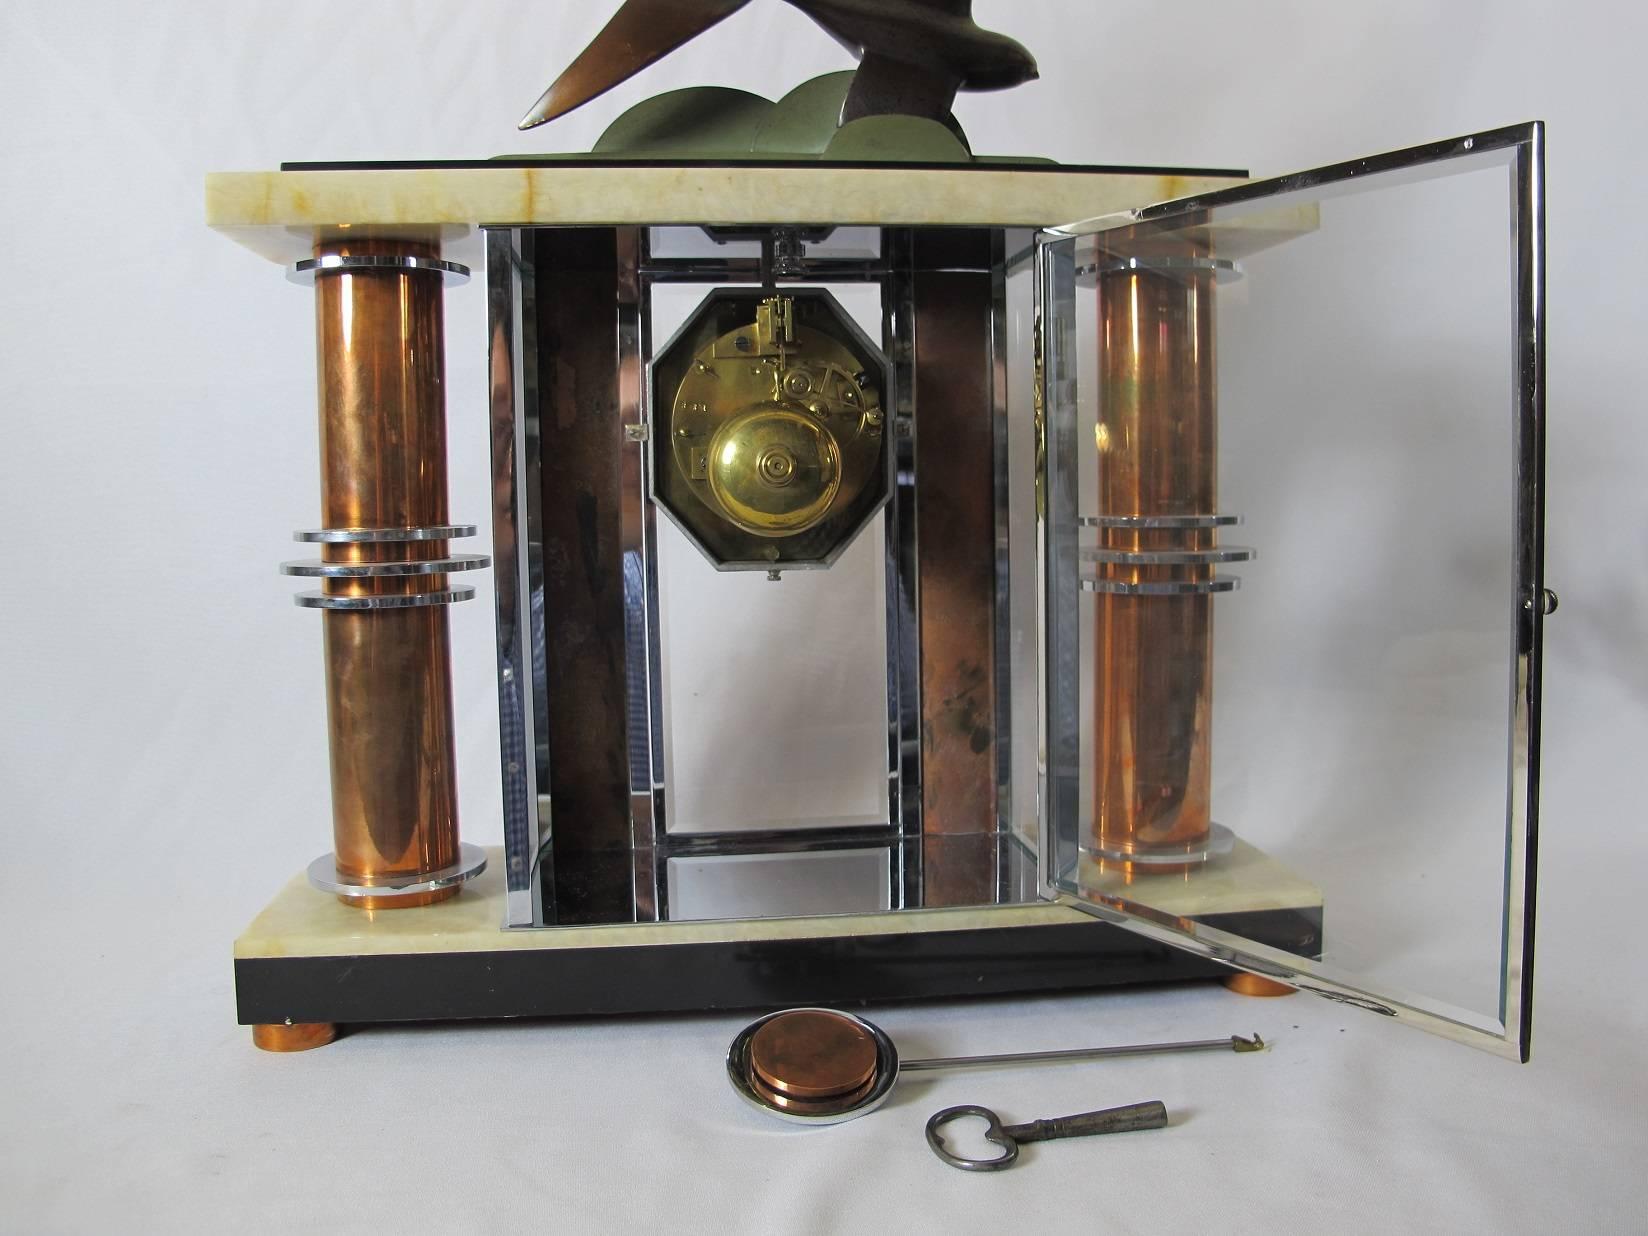 Mantel clock of the Art Deco period, circa 1925. Made of marble, bronze and copper. Restored, including clock key.